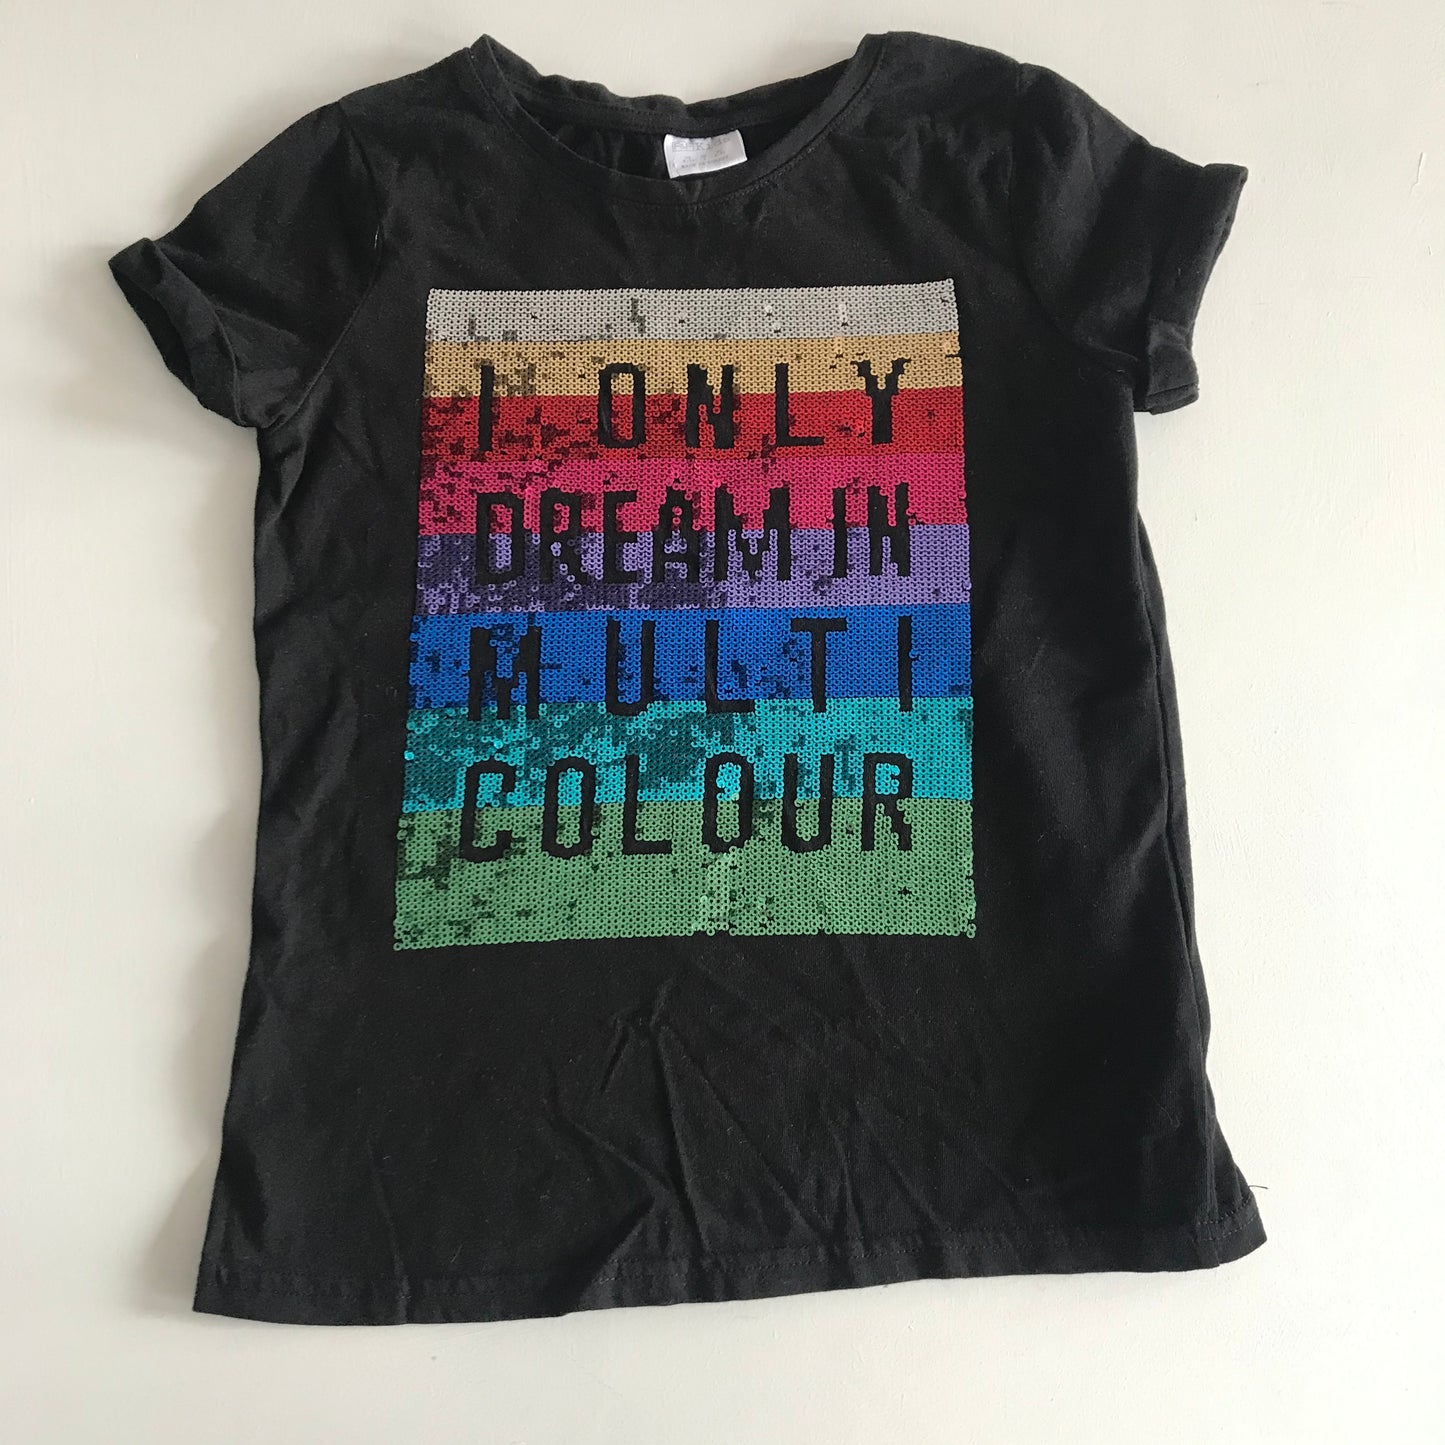 Black T-shirt with Rainbow Sequin Age 8